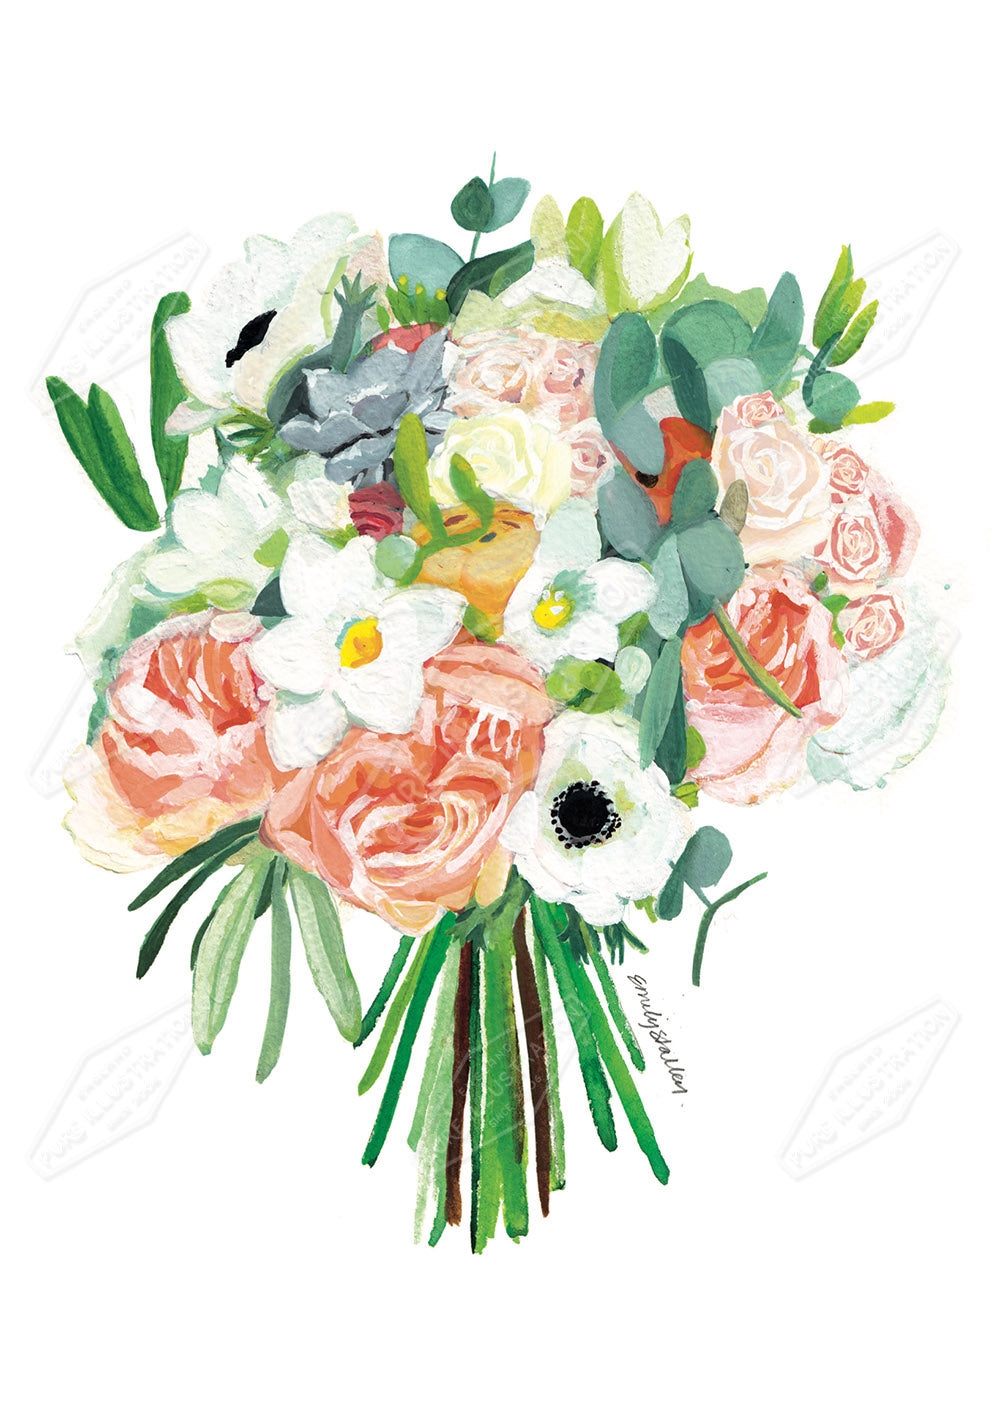 00034348EST- Emily Stalley is represented by Pure Art Licensing Agency - Everyday Greeting Card Design